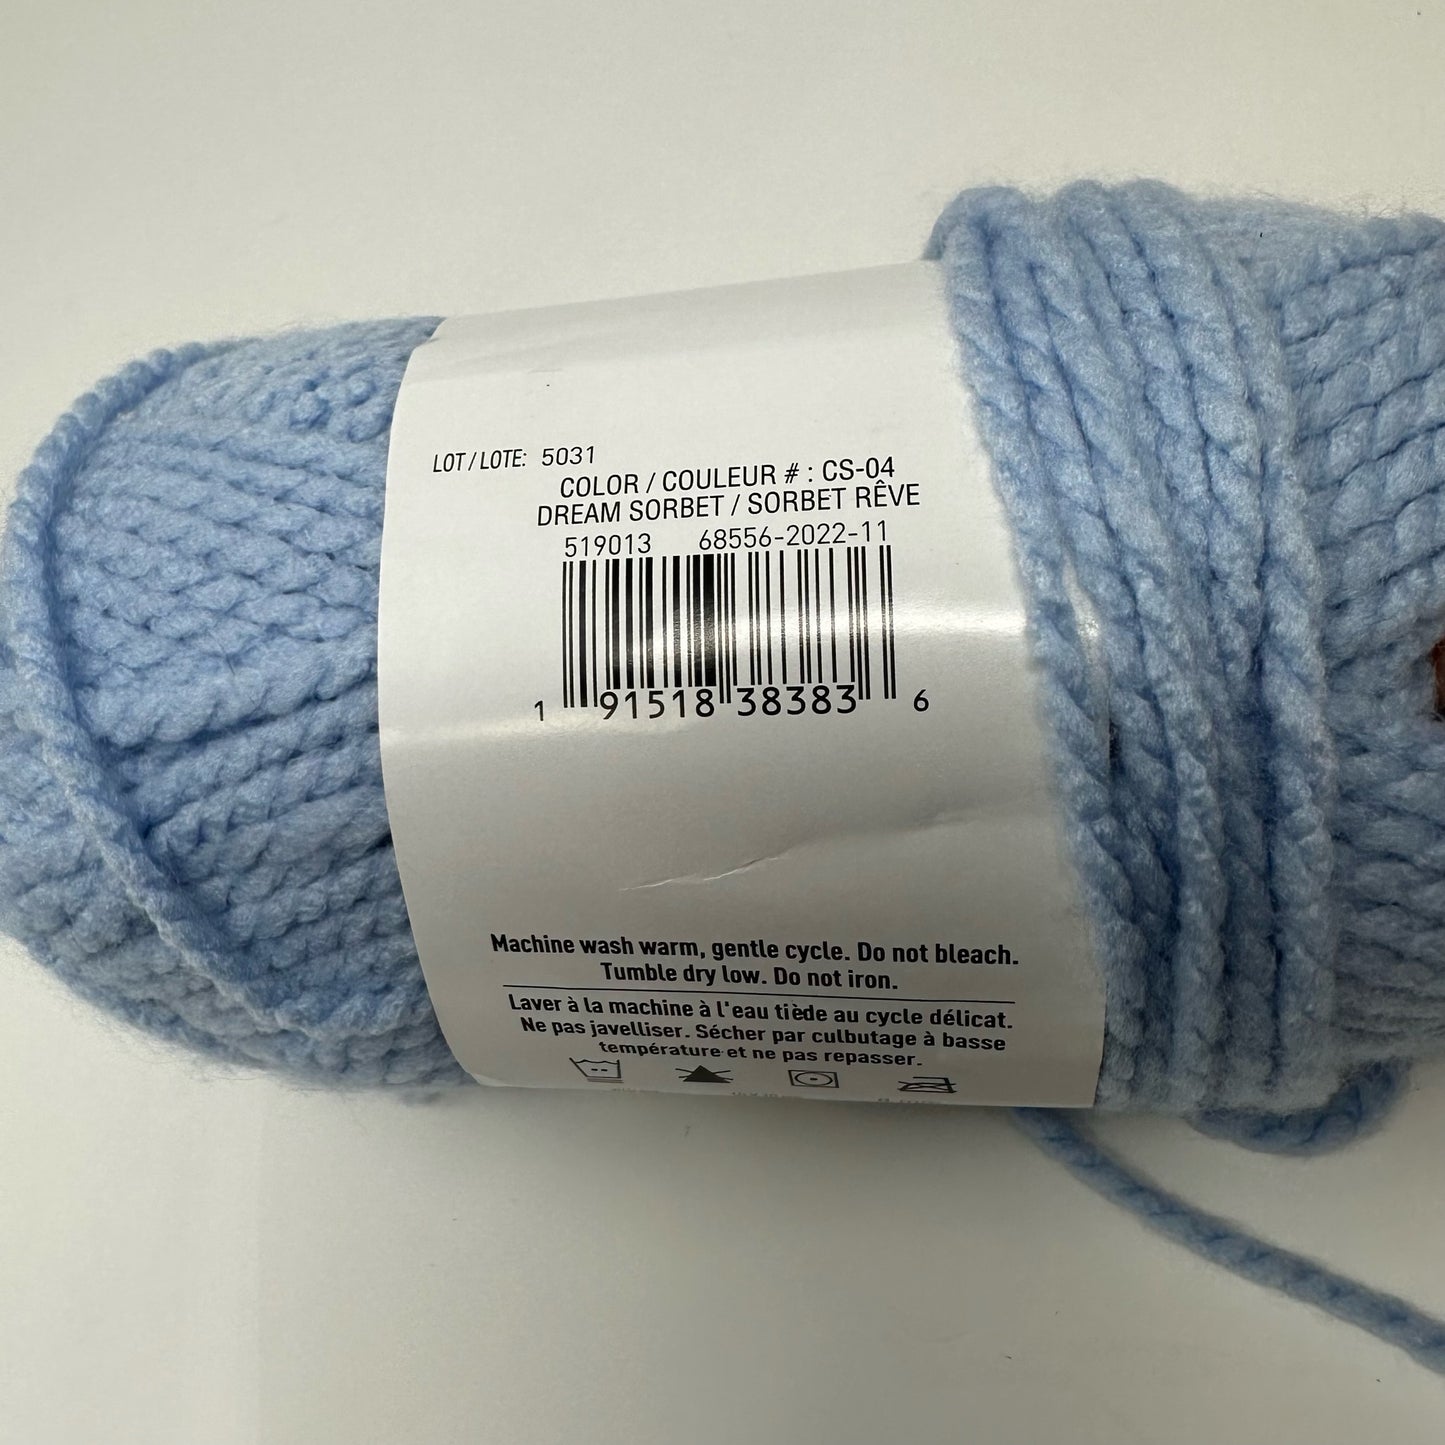 Loops and Threads CHARISMA Bulky Yarn – Thrift Yarn Store